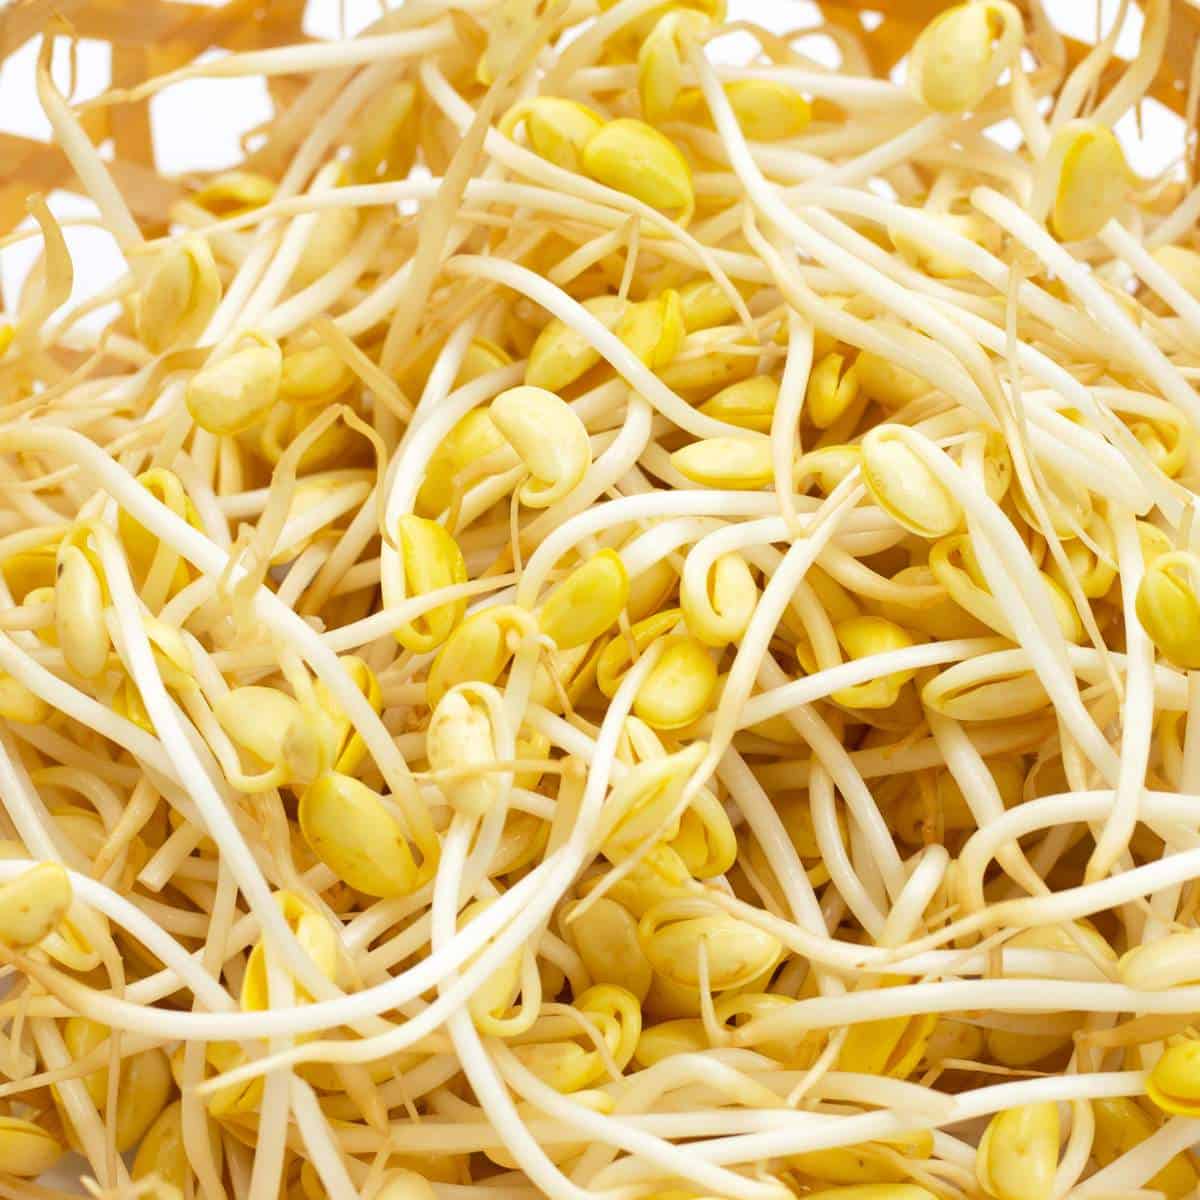 Soybean Sprouts.jpg